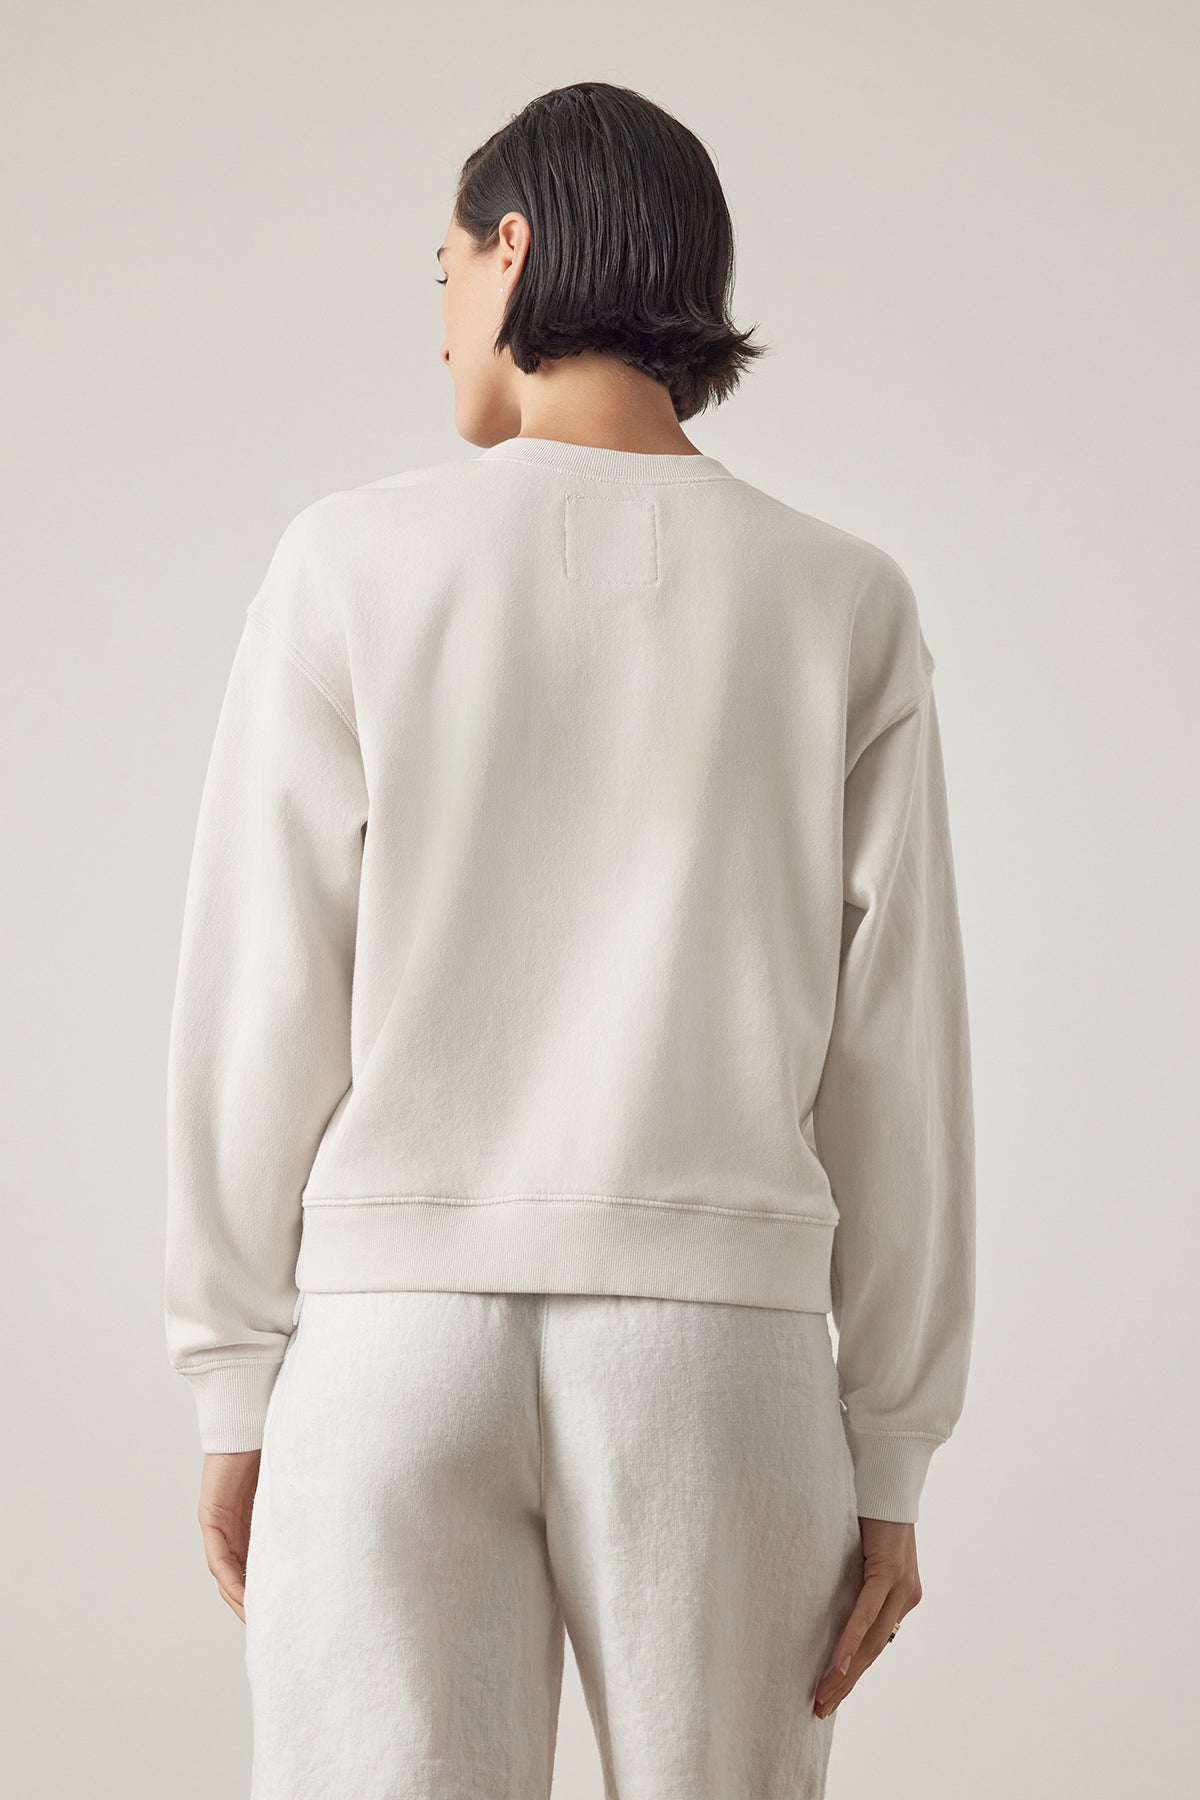 Rear view of a person with short black hair wearing a Velvet by Jenny Graham Ynez sweatshirt and matching pants made of organic cotton, standing against a neutral background.-36909394526401